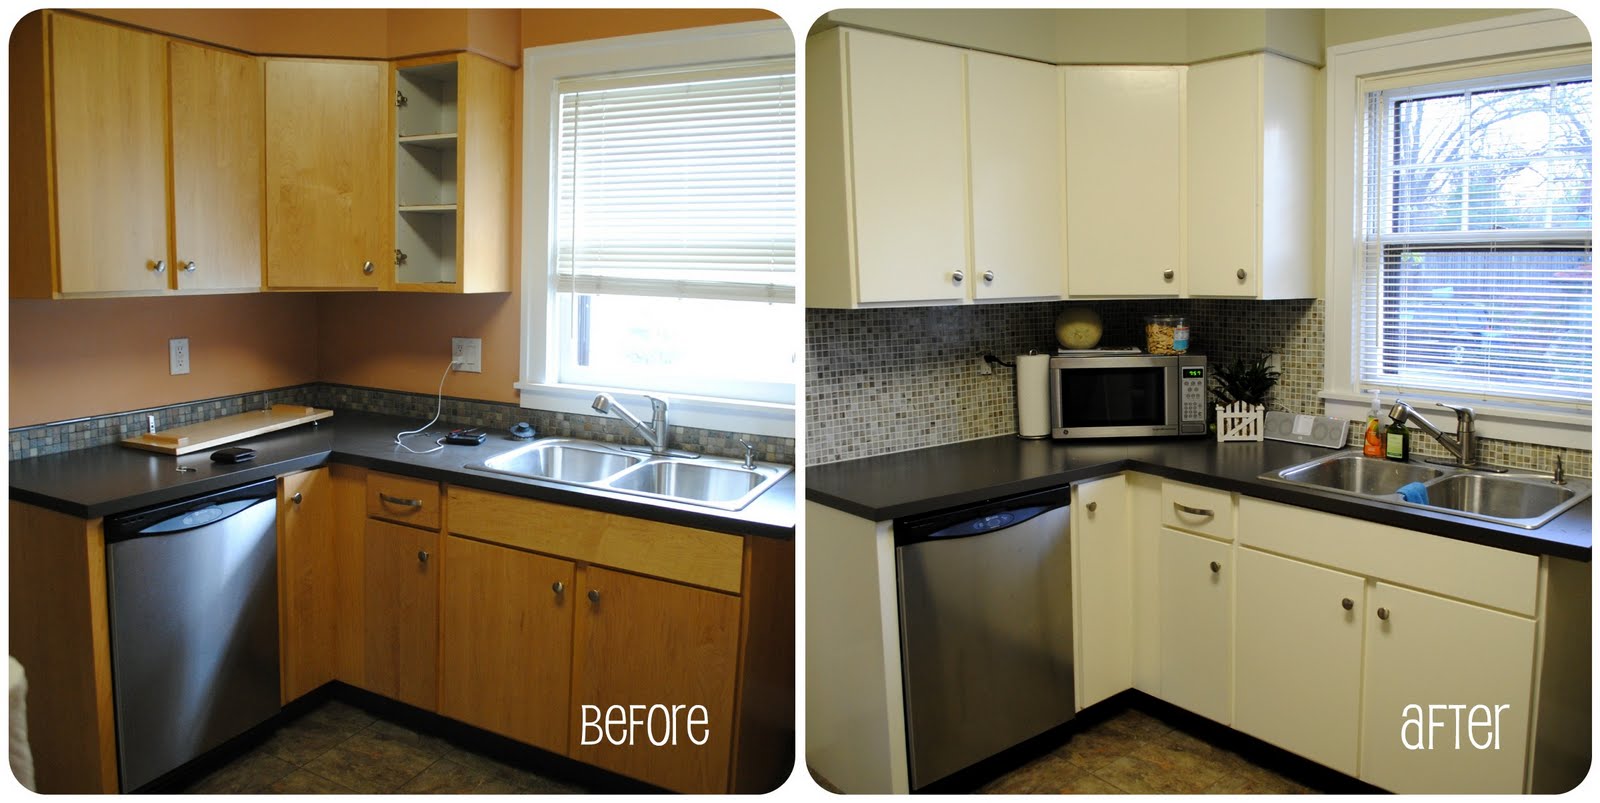 THE DAILY BREES Kitchen  Before  After 